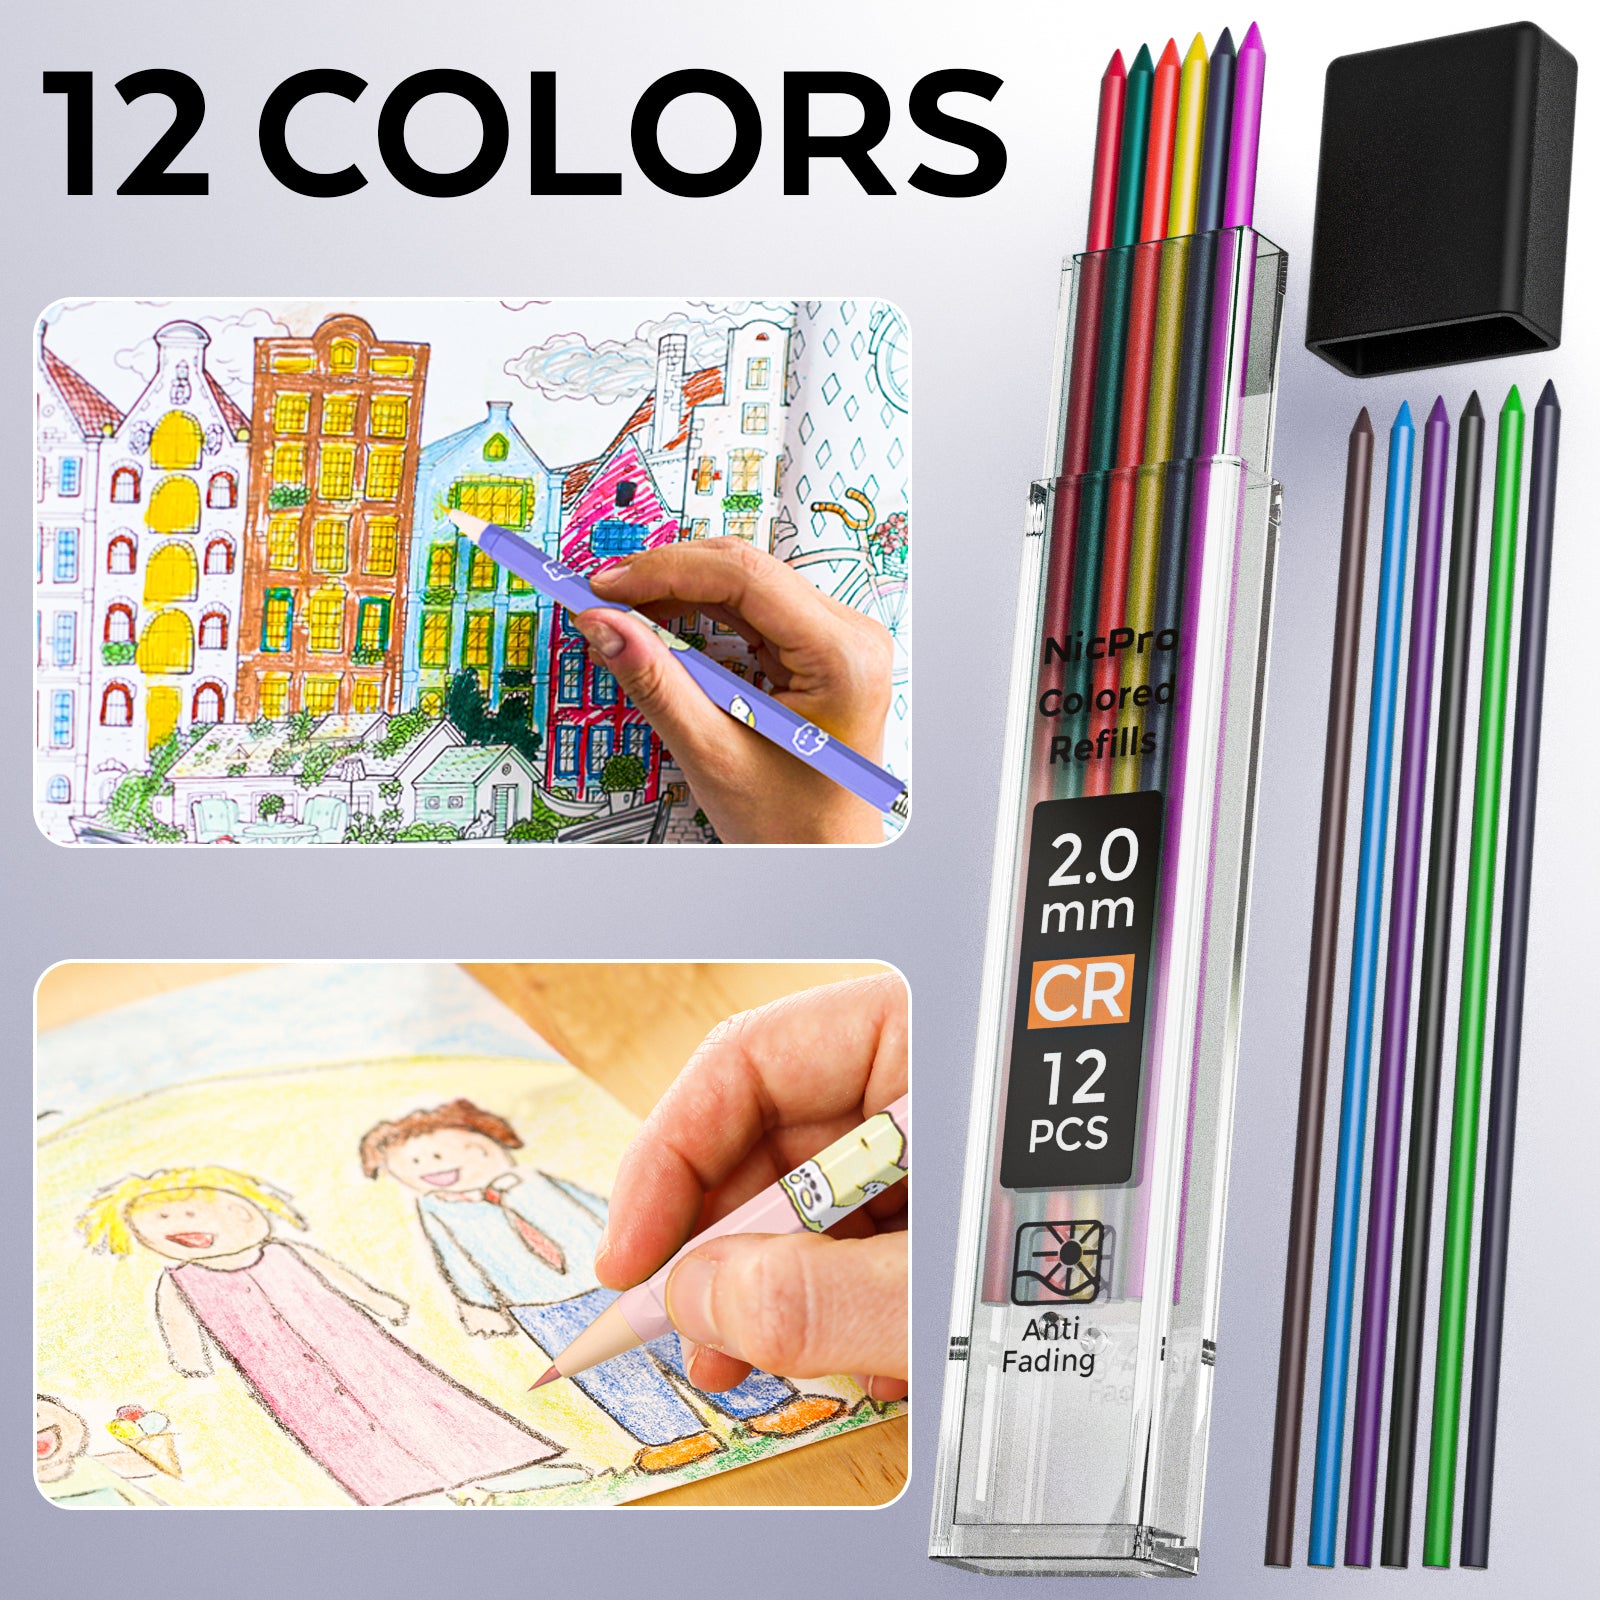 Nicpro 14 PCS Pastel Mechanical Pencil Set in Case, Cute Art Pencils Bulk 0.5 & 0.7 & 0.9 mm & 2mm Graphite Lead Holder, (2B HB Colors) Lead Refills, Erasers For School Drafting Sketching Drawing